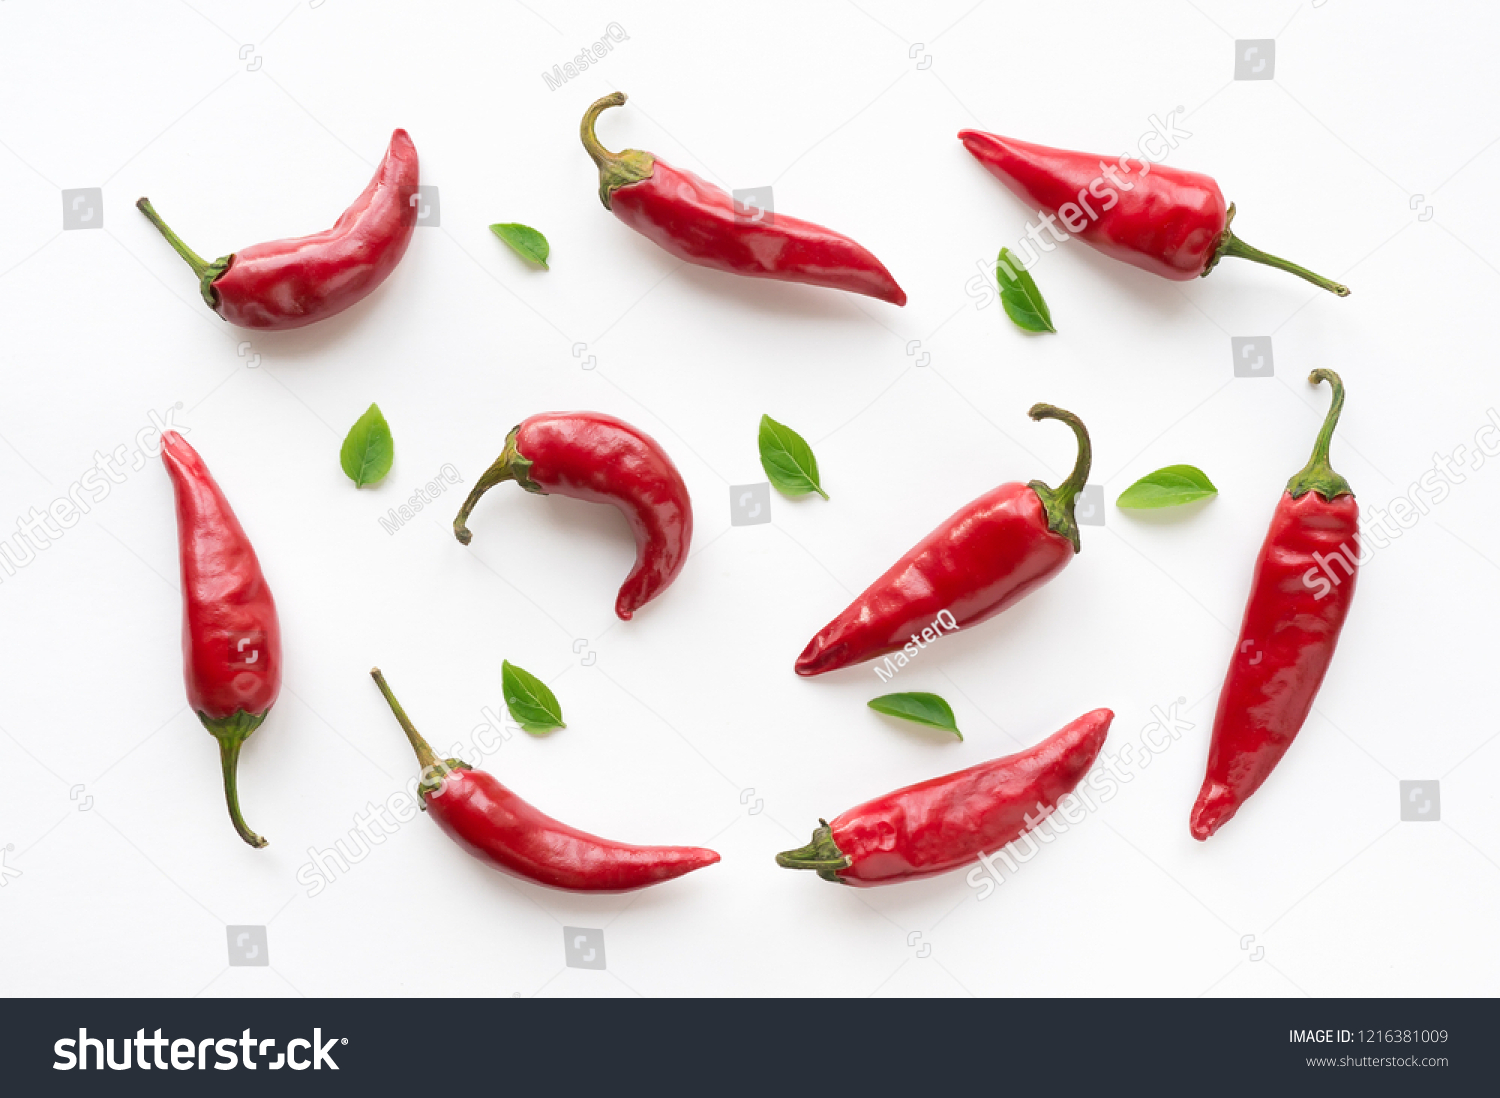 Red hot chilli peppers with green leaves on white background. Food pattern.  #1216381009